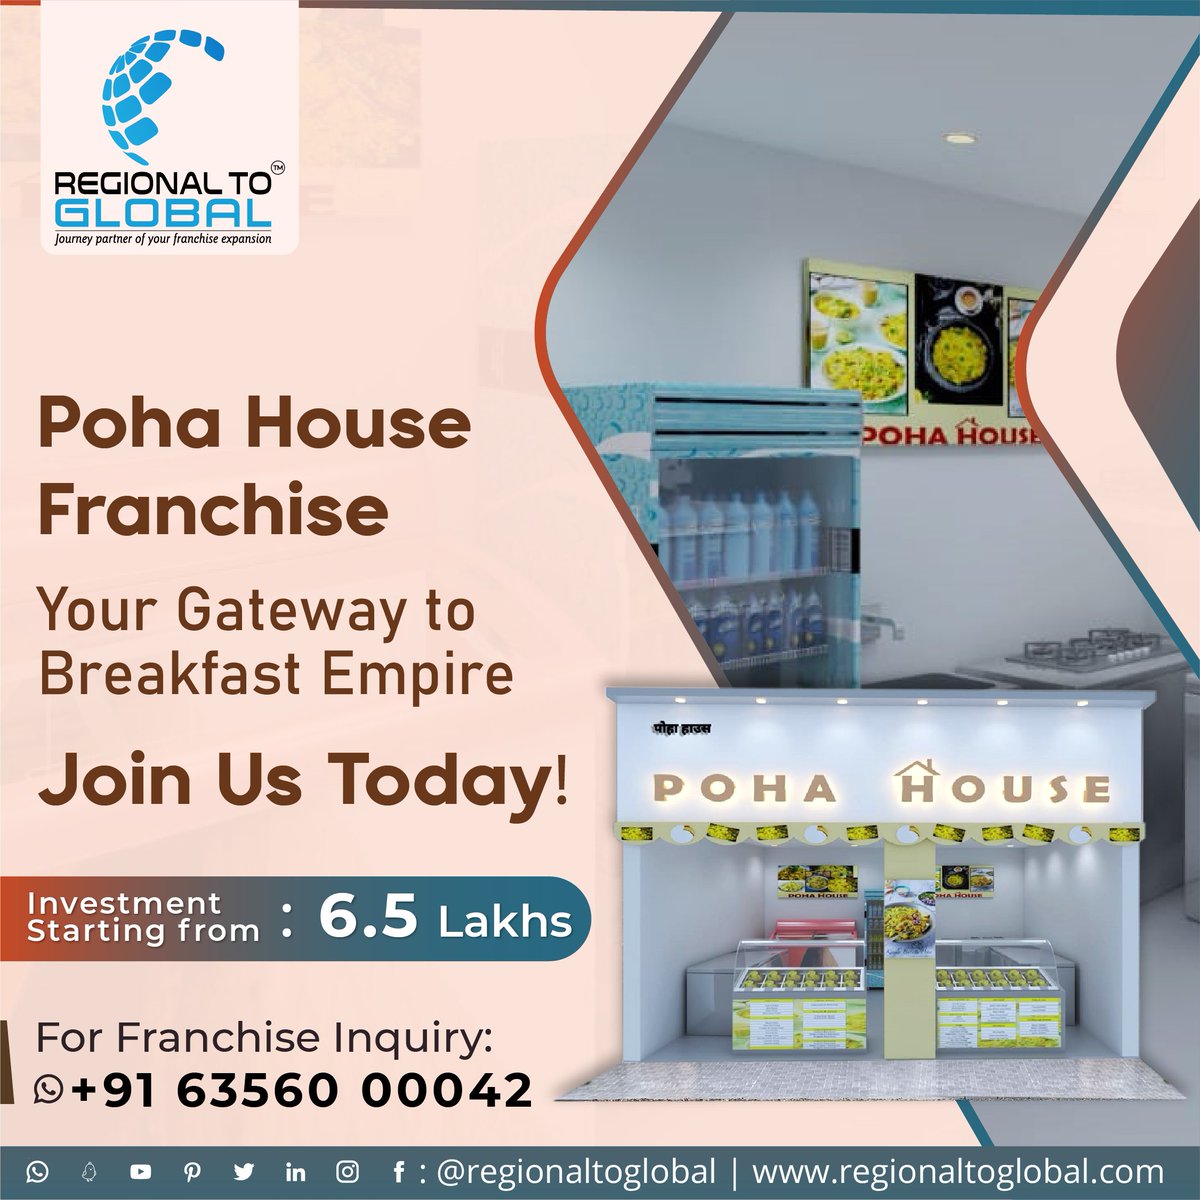 Poha House Franchise: Your Gateway to Breakfast Empire
Join Us Today!

#franchiseopportunities #pohahouse #pohahousefranchise #poha #JoinUsNow #lowinvestmentbusiness #franchiseinvestors #FranchiseBusiness #FranchiseSuccess #breakfastbusiness